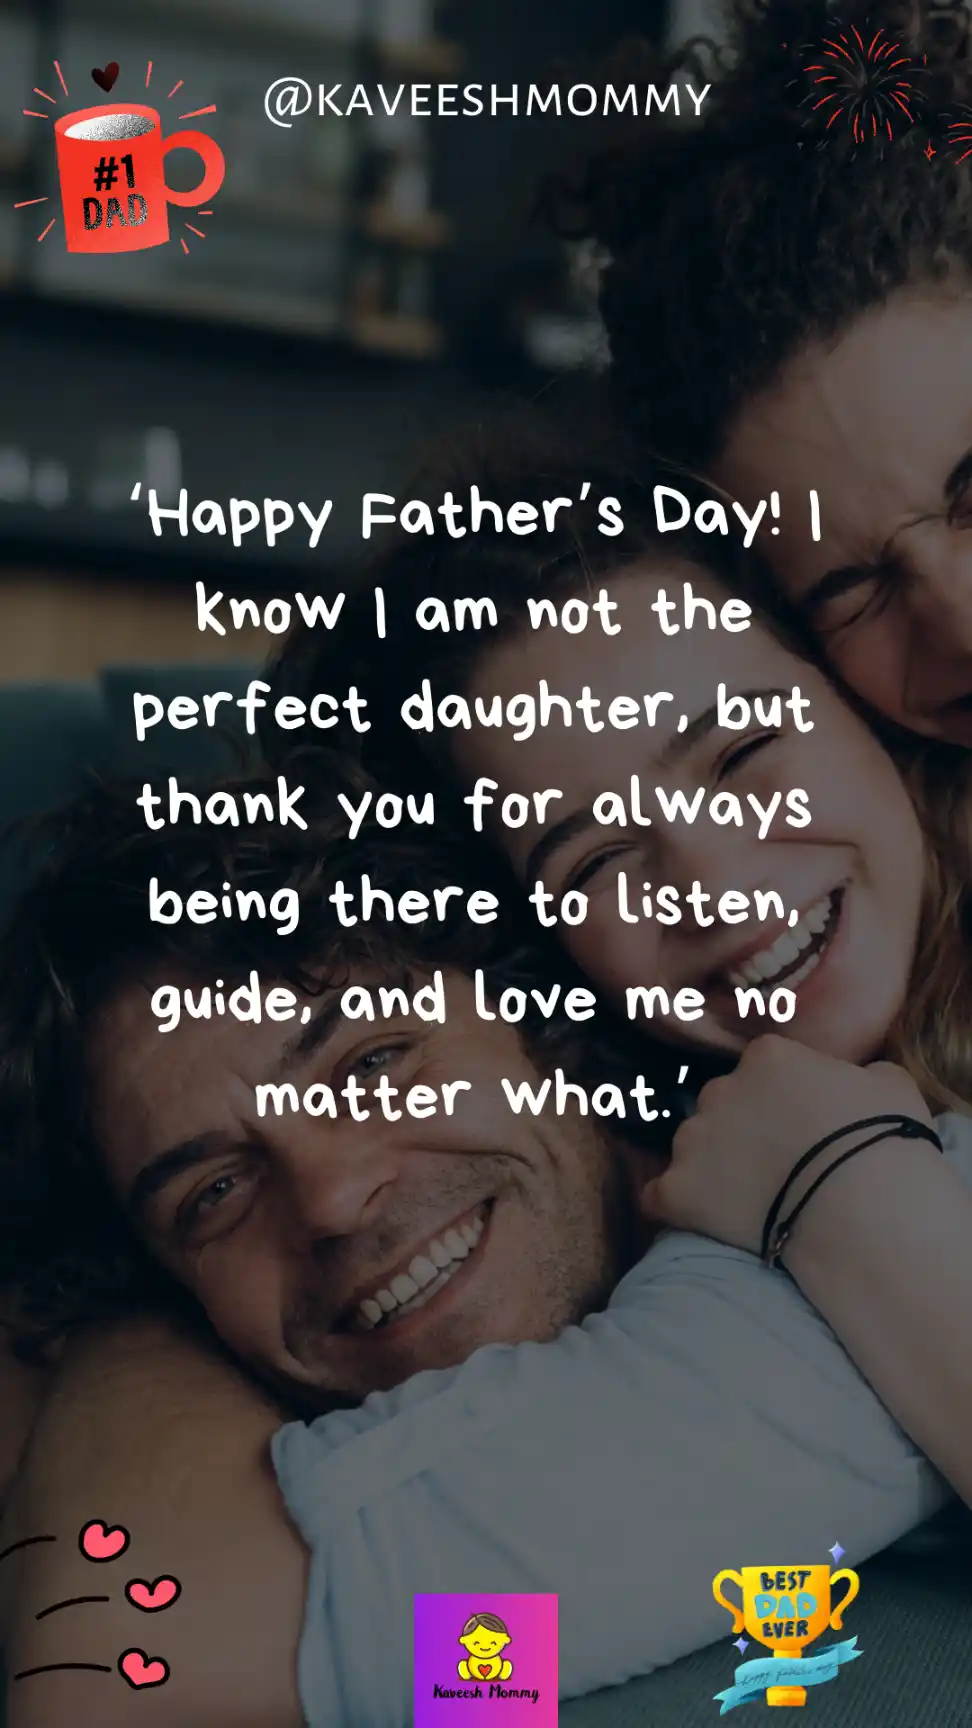 daughters day quotes for father-‘It turns out great dads also raise great daughters! Happy Father’s Day Dad!’